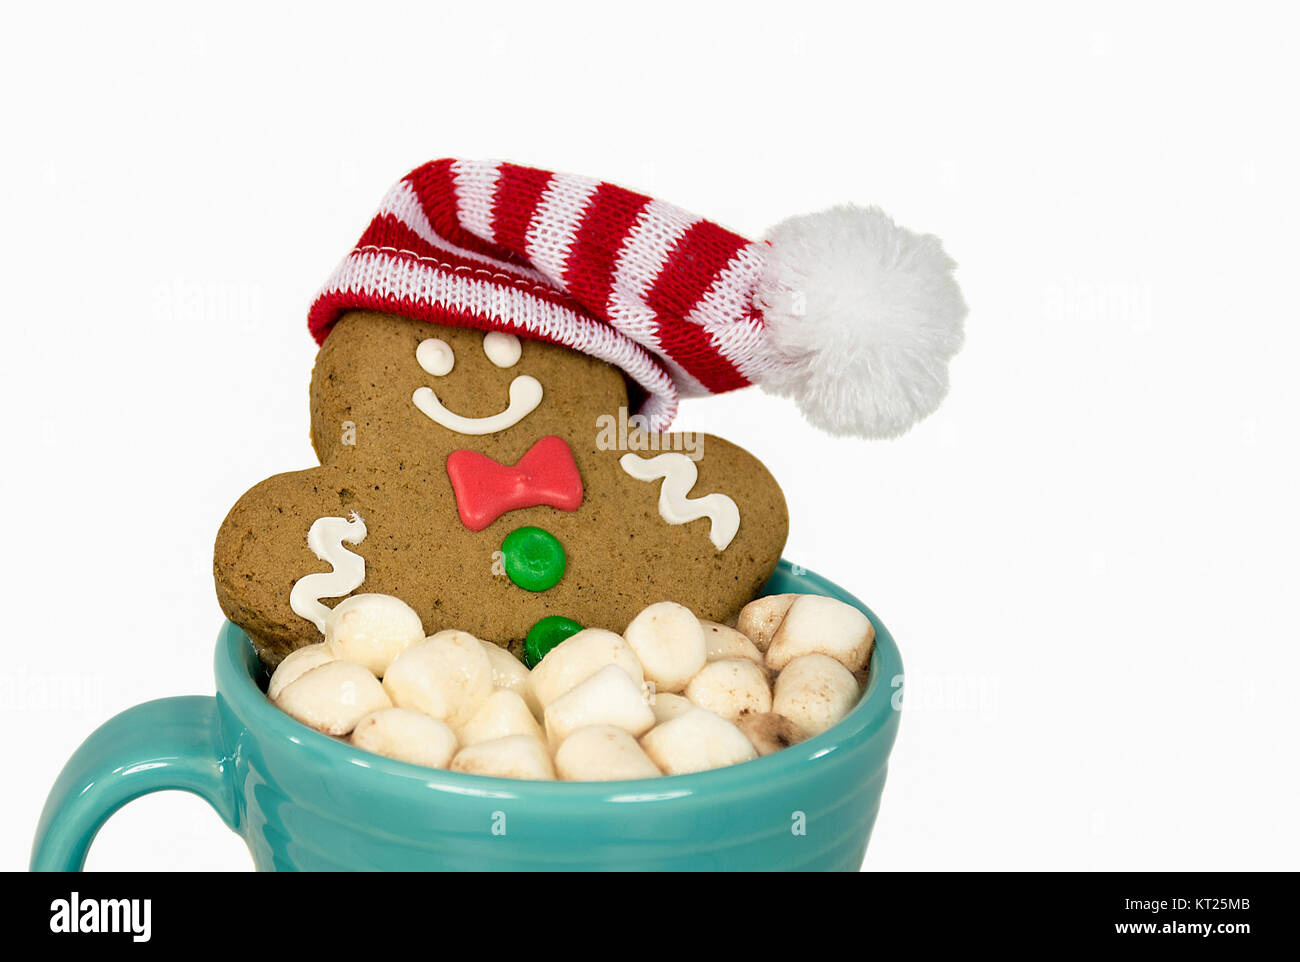 turquoise mug with gingerbread man wearing striped stocking cap in hot cocoa drink with marshmallows Stock Photo